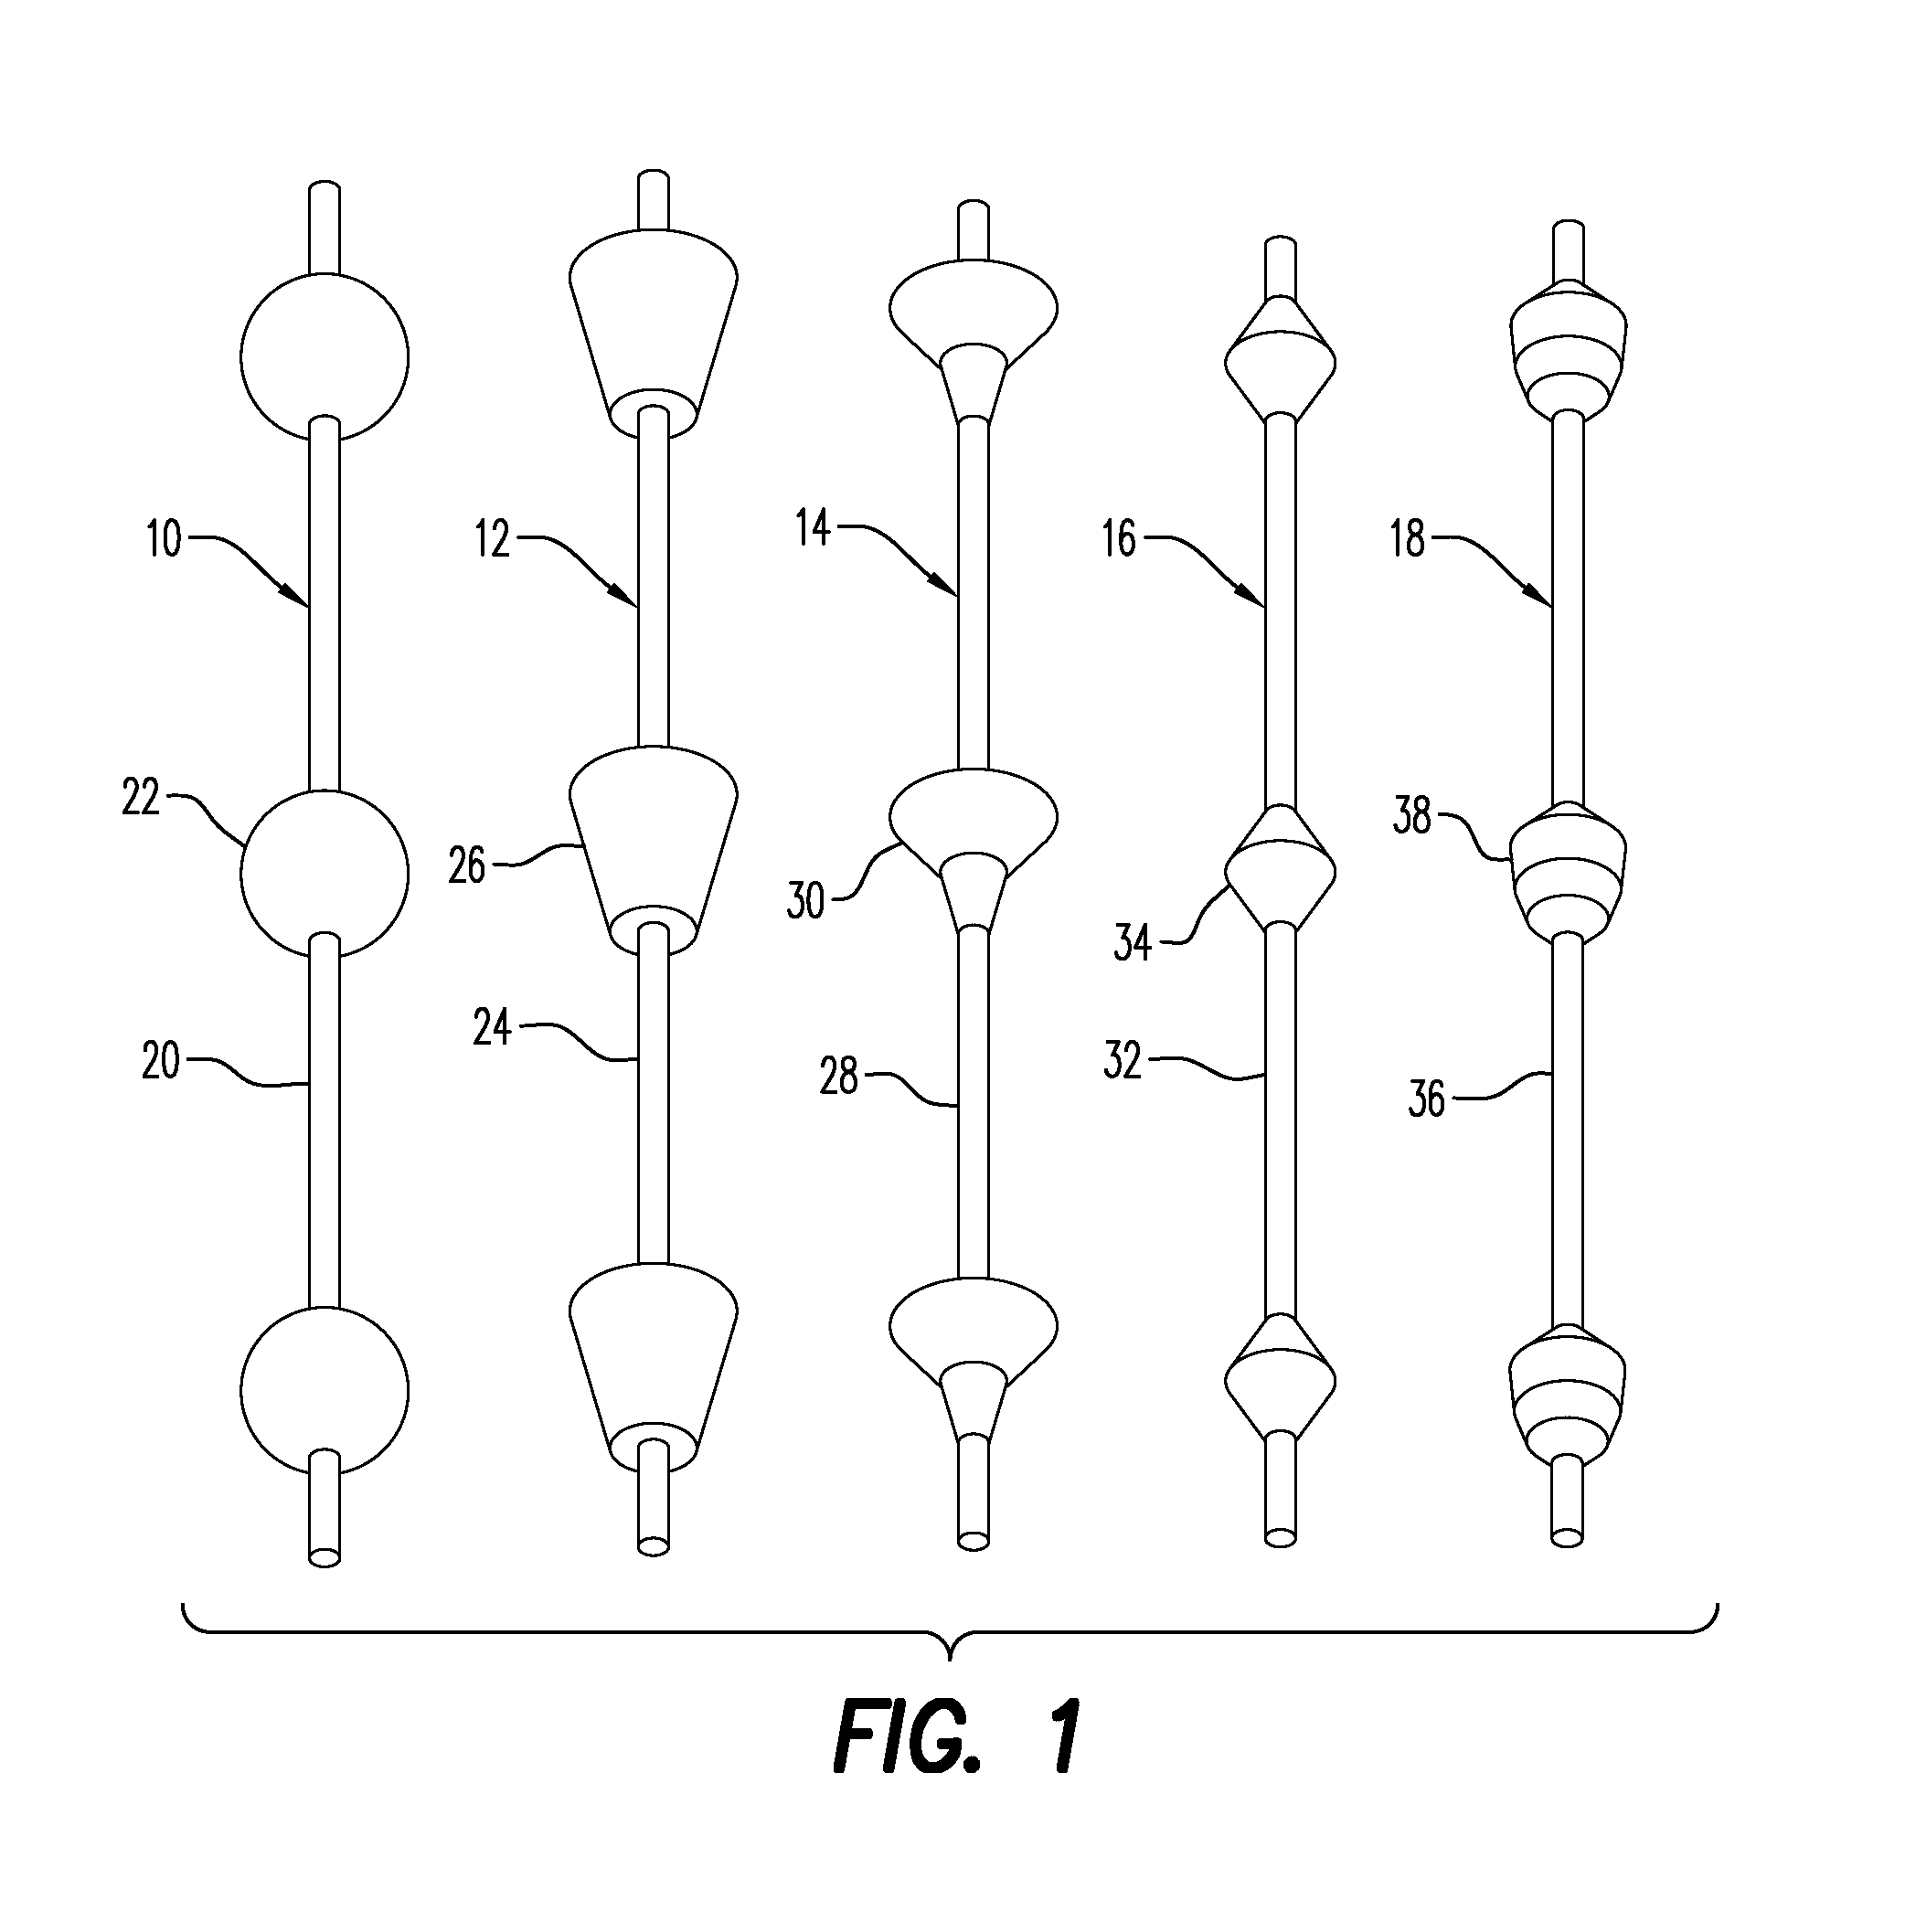 Surgical suture system, tissue restraints, and tissue anchors